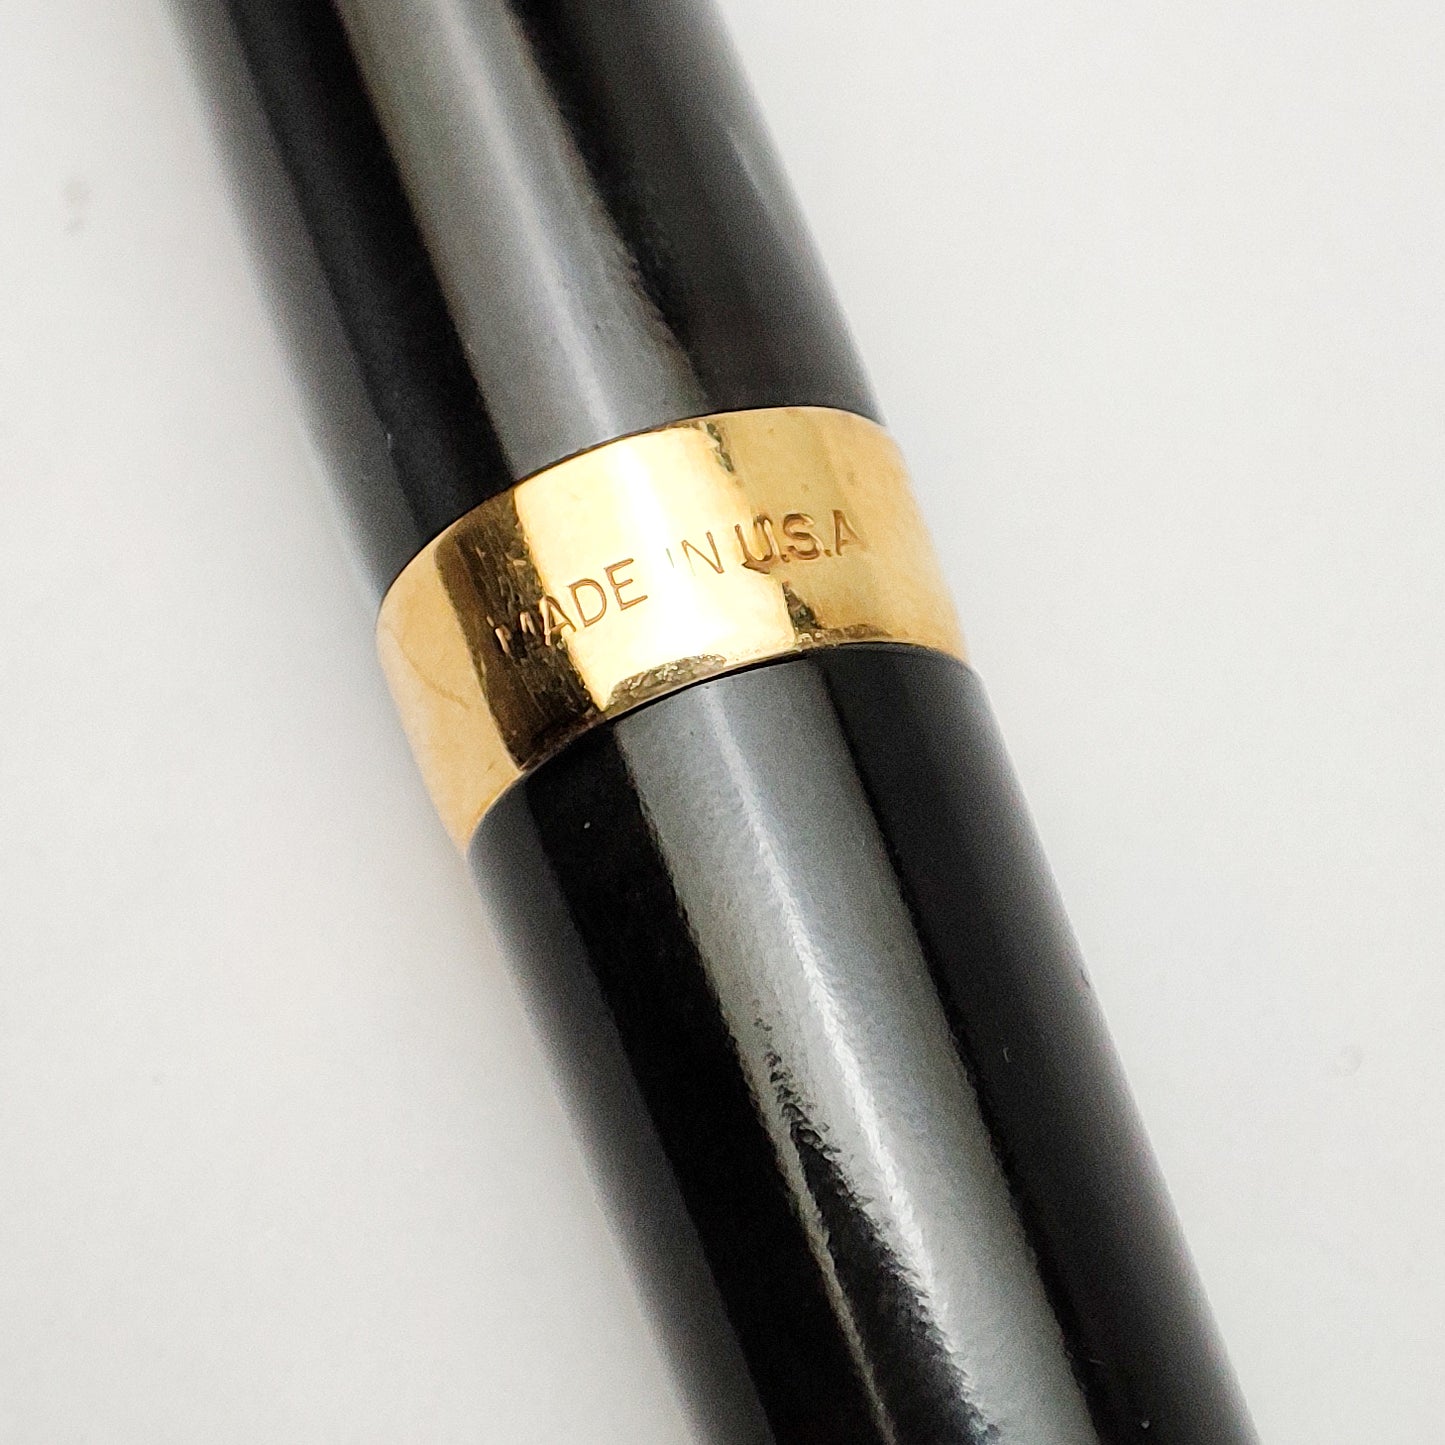 PARKER DUOFOLD INTERNATIONAL M.FULTZ REPLICA PEARL SWIRL 14K GOLD BAND LIMITED EDITION X/88 FOUNTAIN PEN (2005)